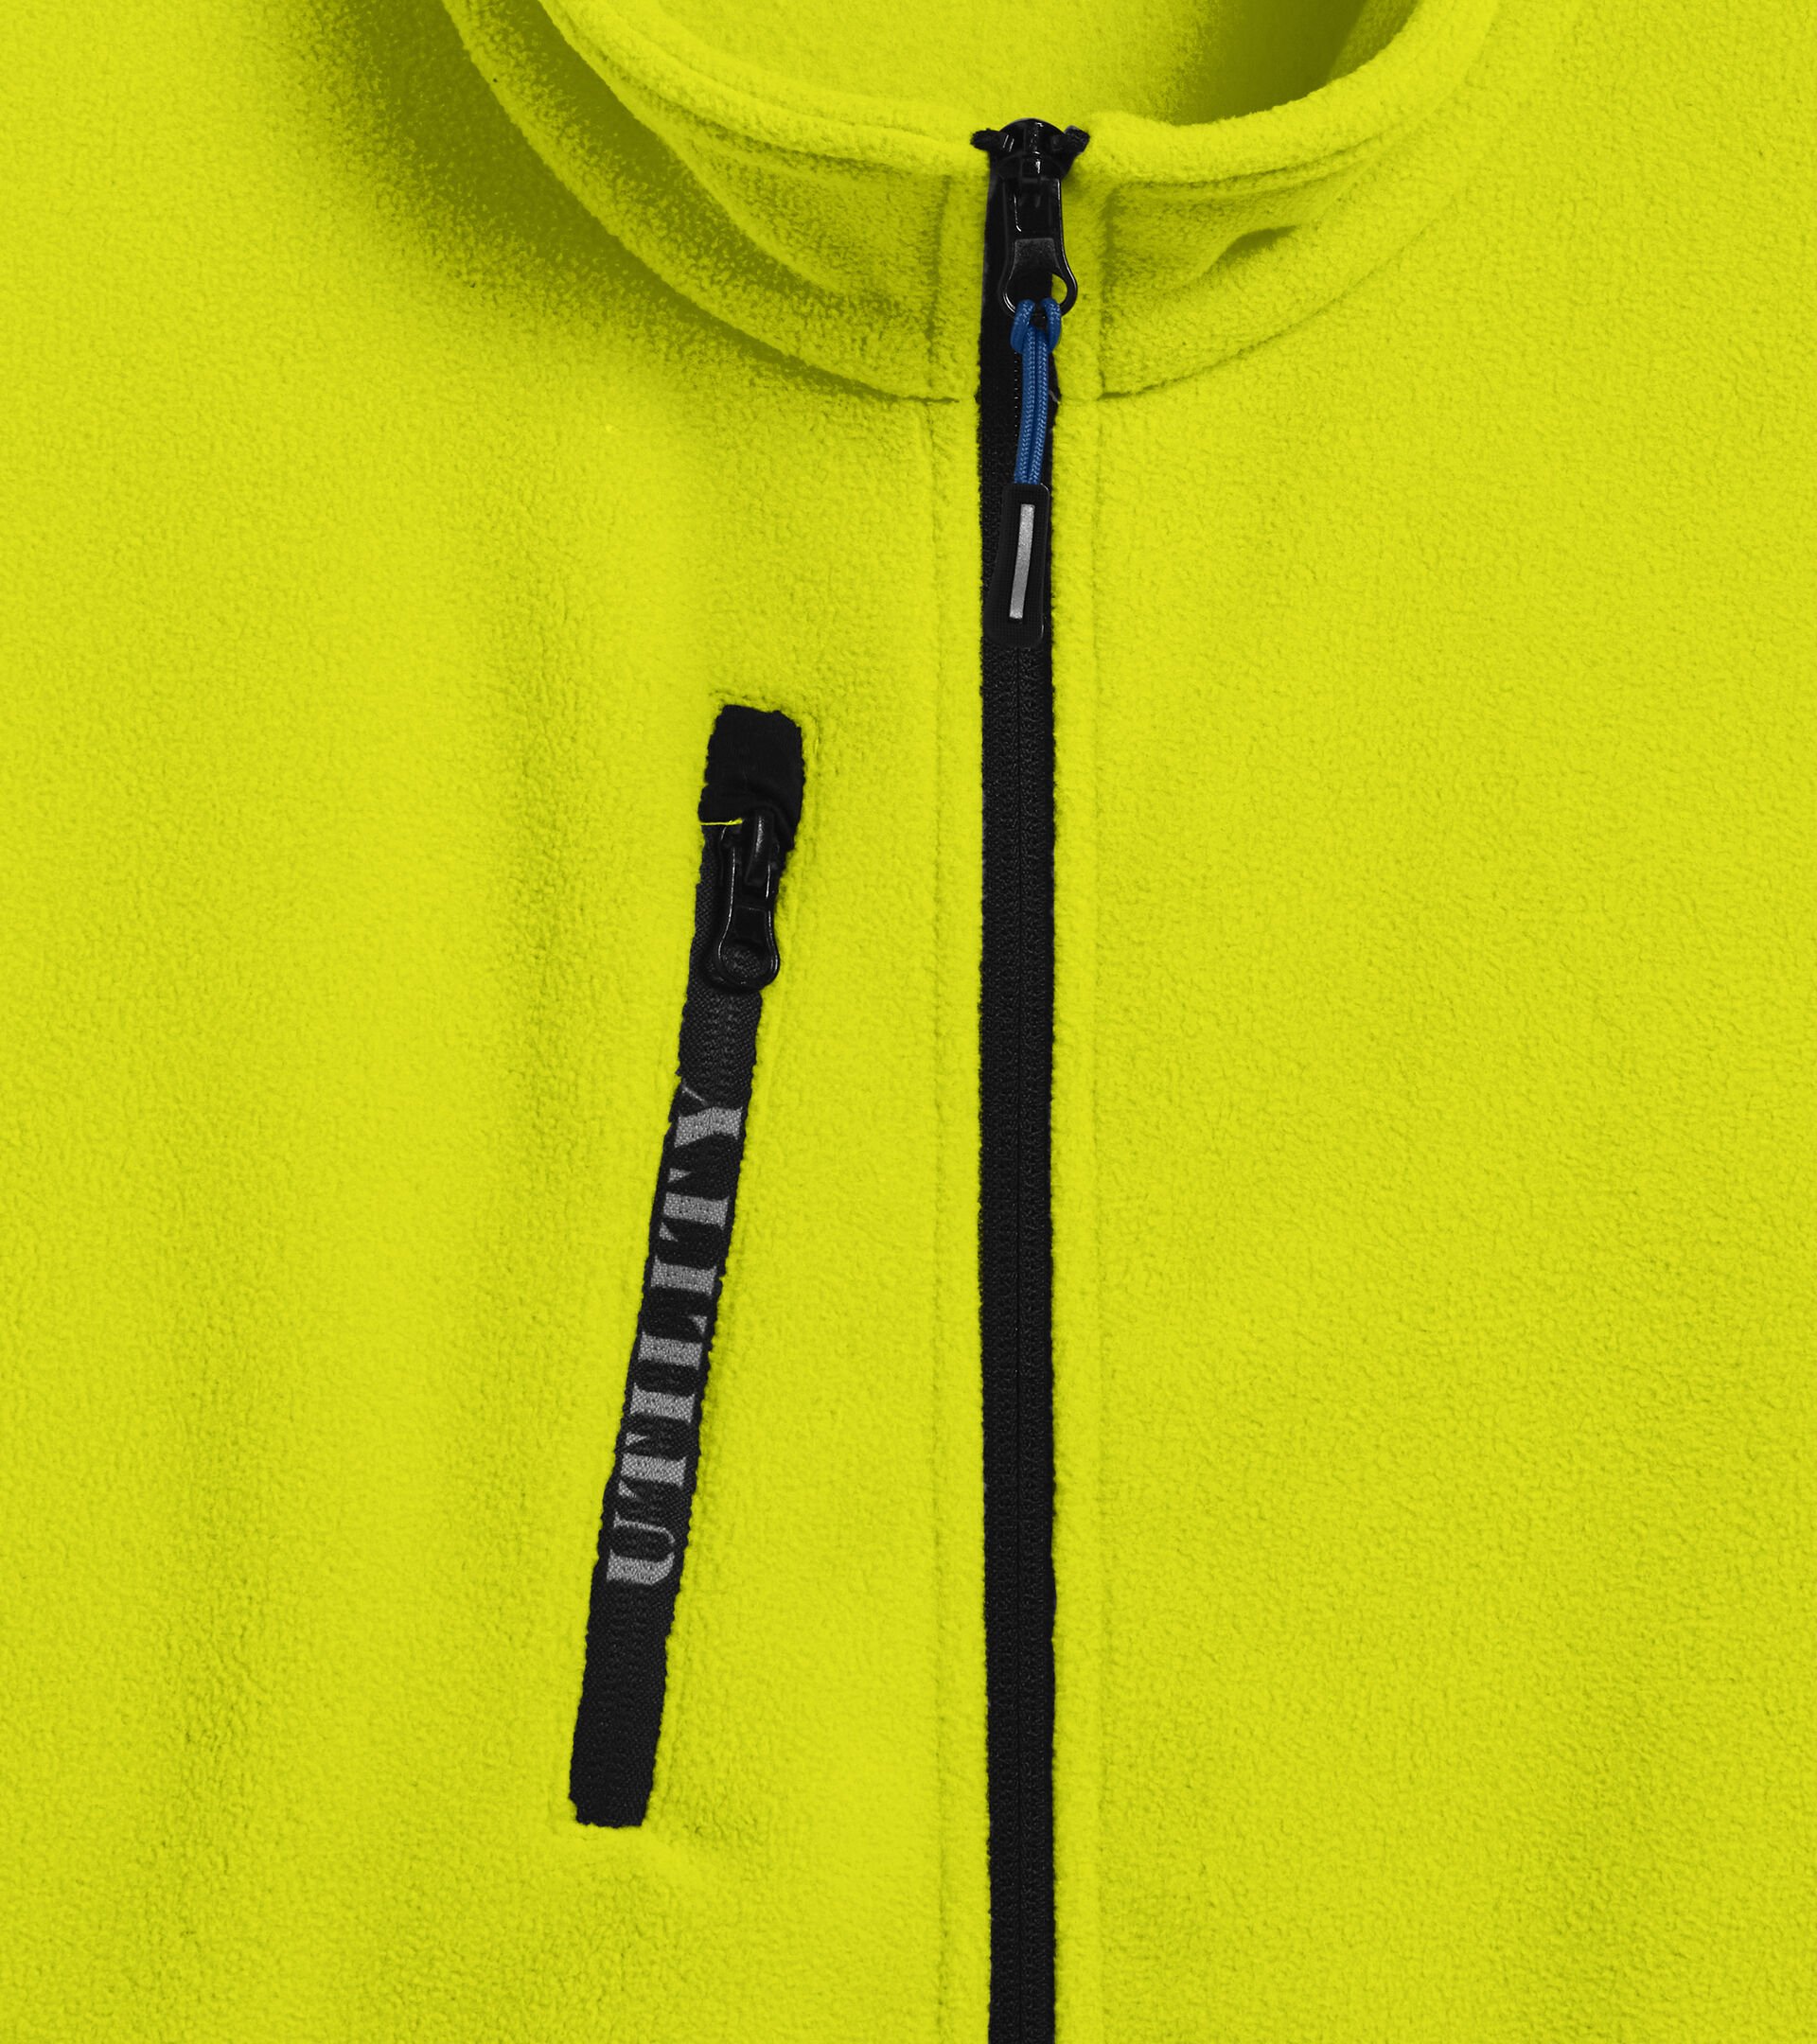 Arbeits-Sweater SWEAT PILE HV 20471:2013 3 FLUORESZIEREND GELB ISO20471 - Utility